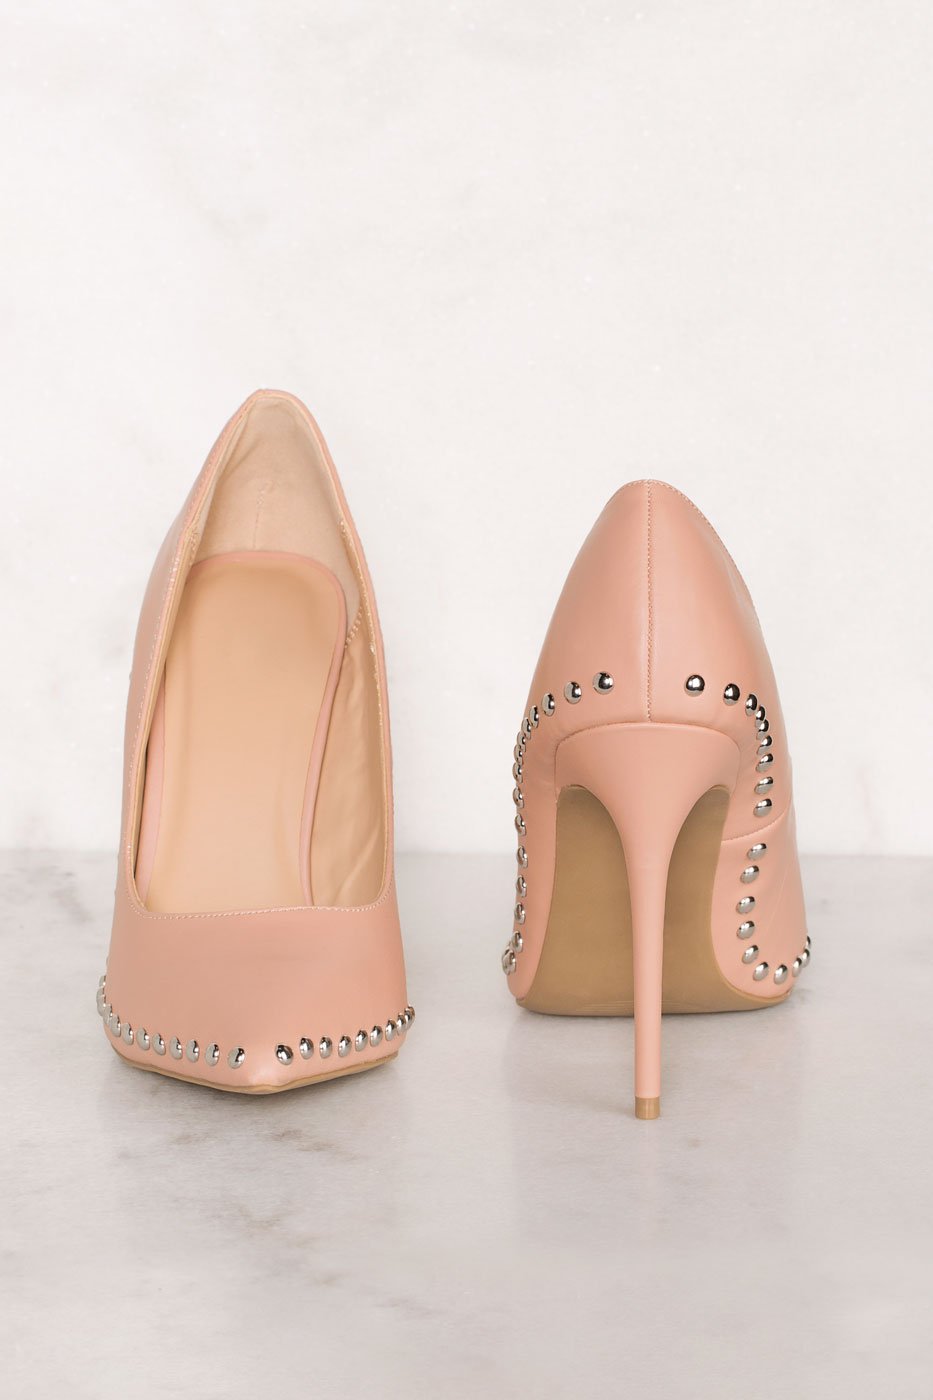 Shoes - Clarisse Studded Heels